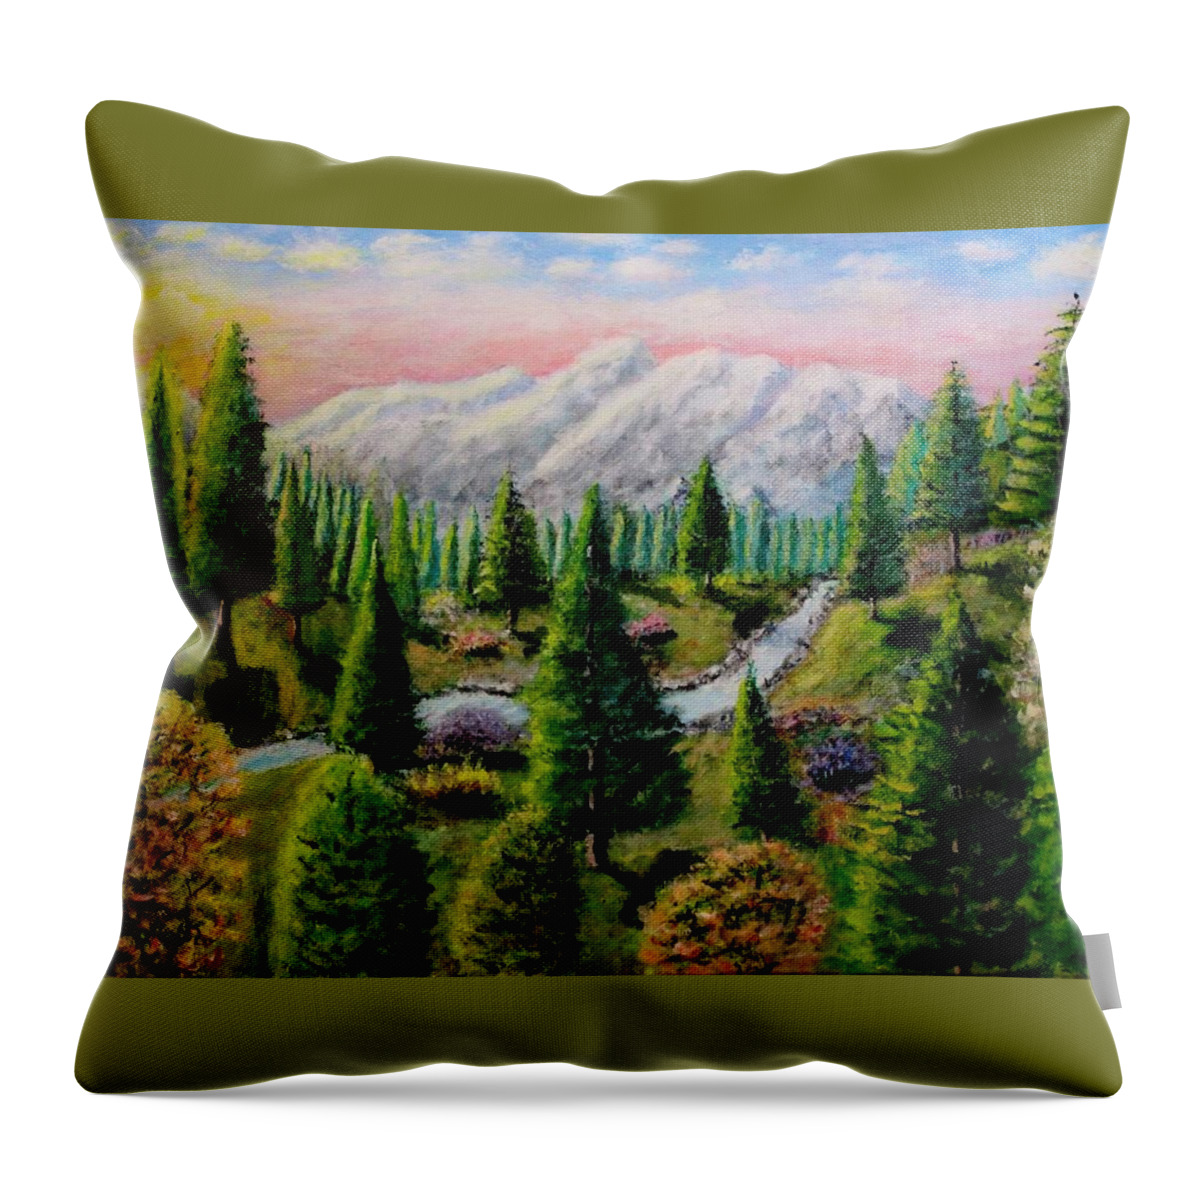 Landscape Throw Pillow featuring the painting  Through The Valley by Gregory Dorosh